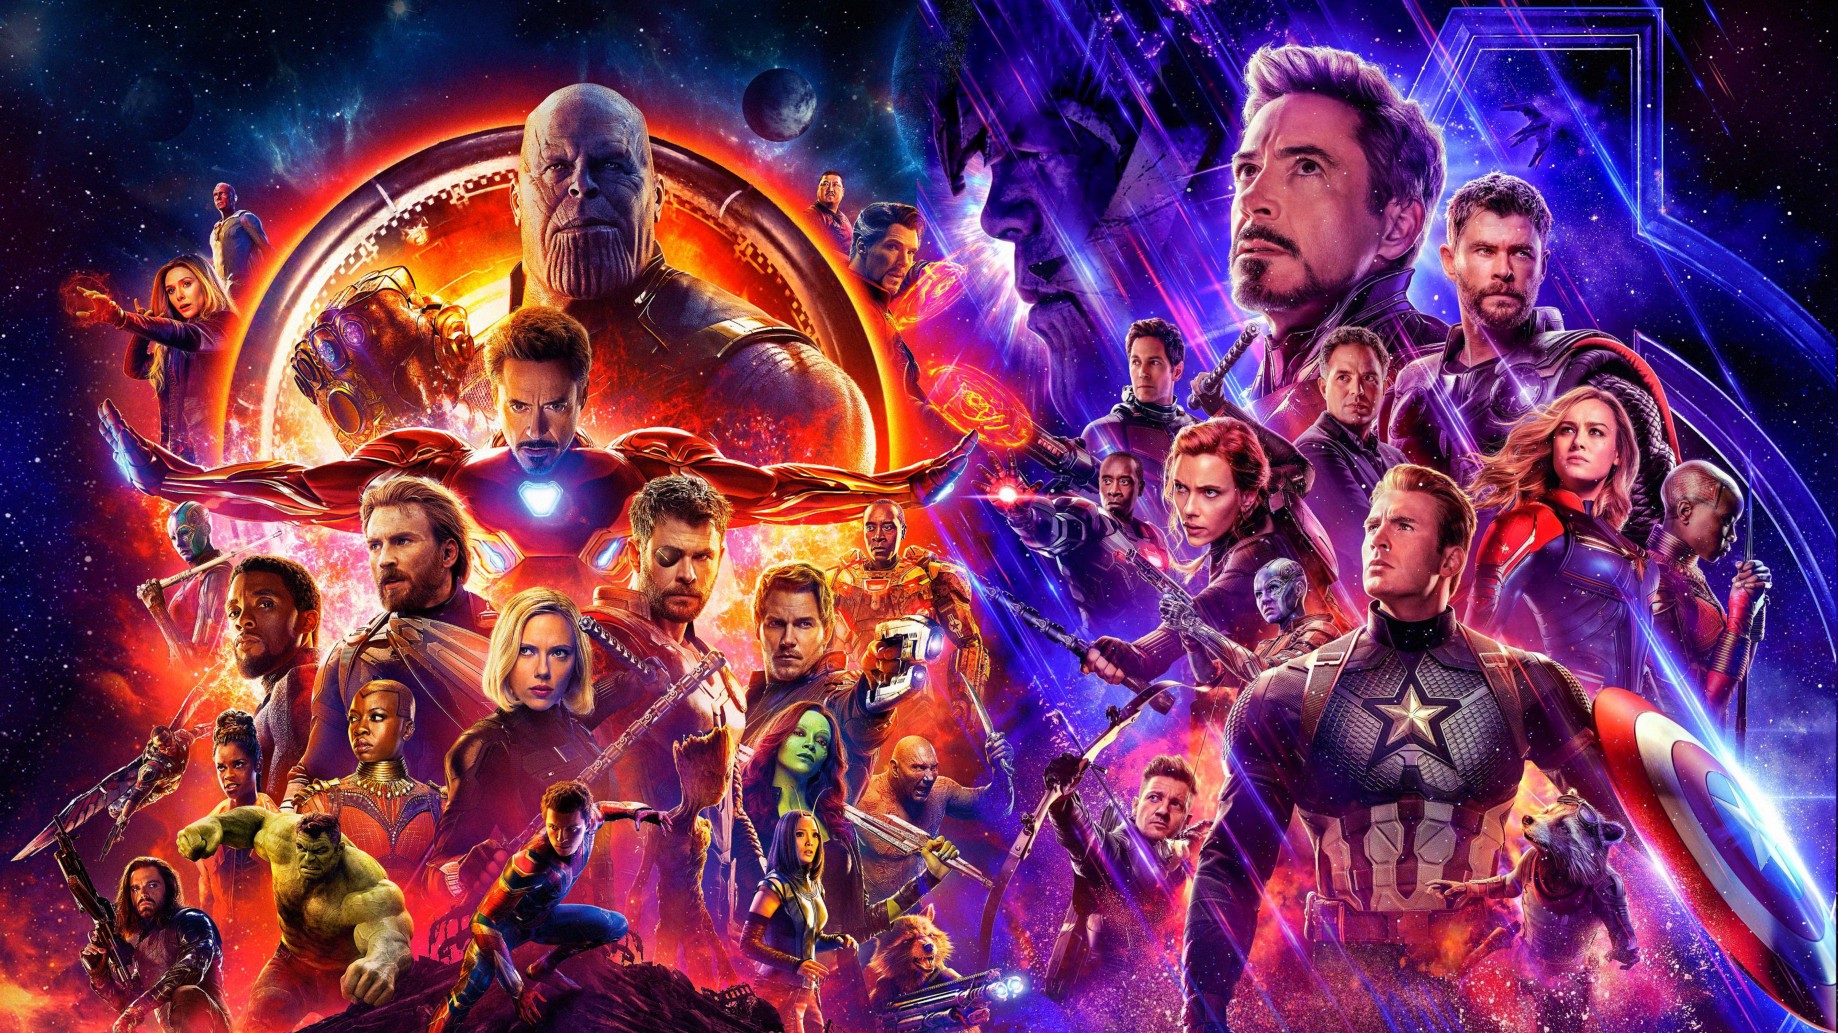 Why was Avengers: Endgame selected as the name for the last movie? Pic courtesy: movieweb.com